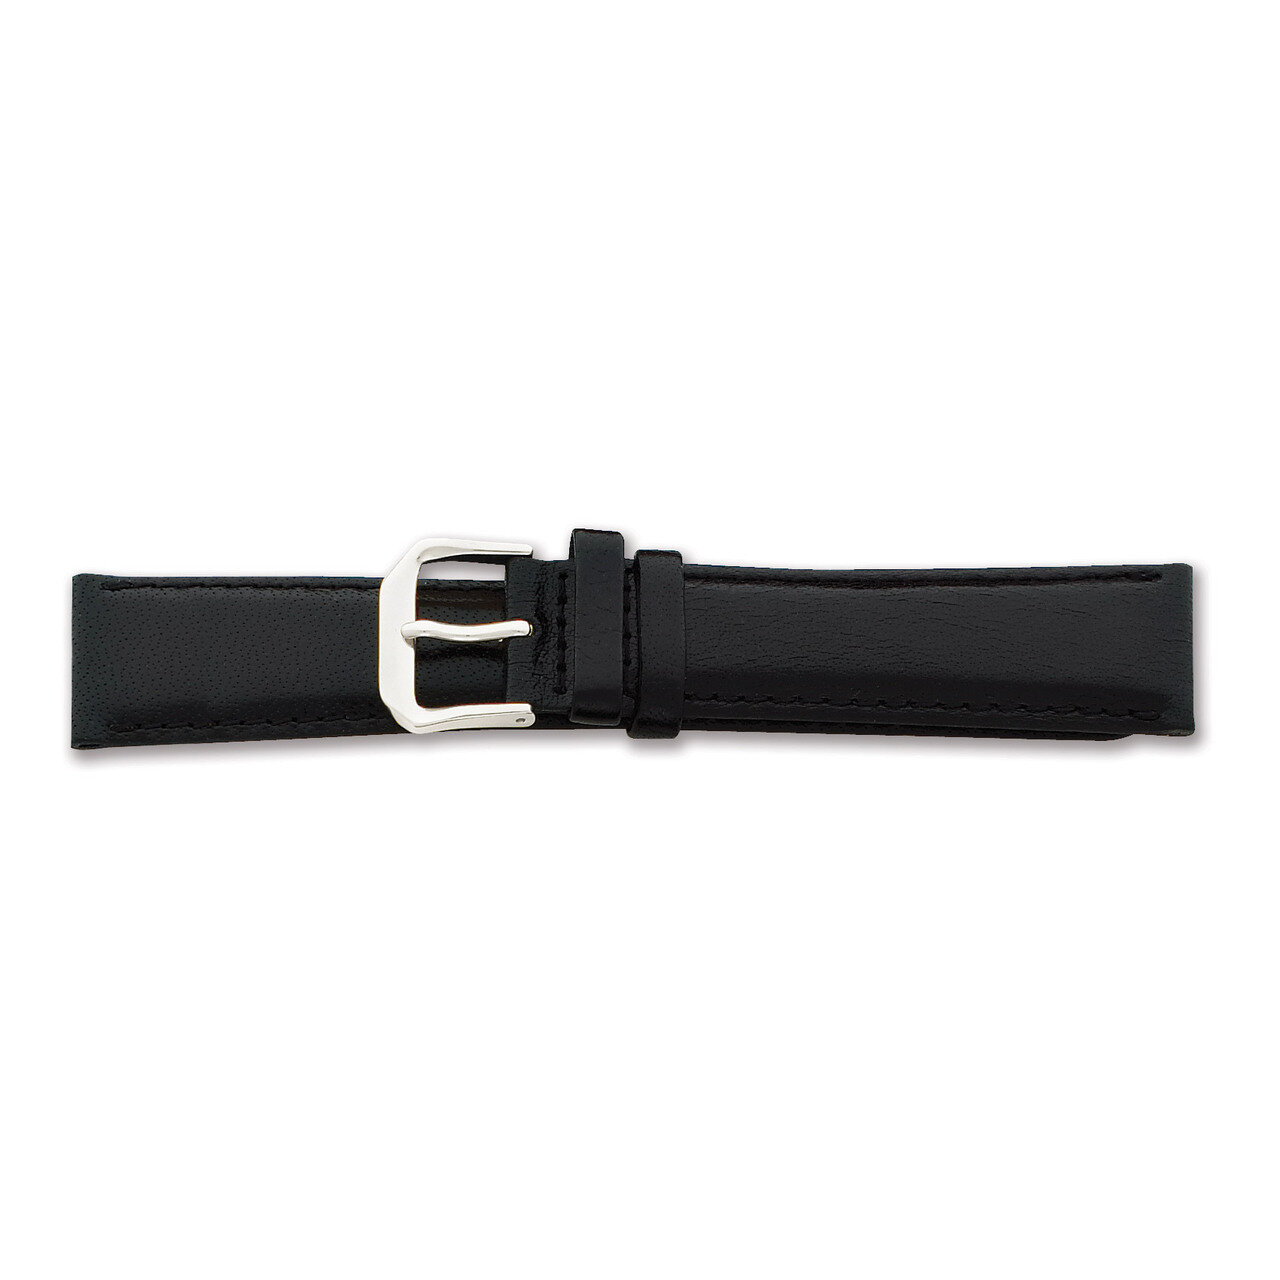 15mm Black Smooth Leather Watch Band 7.5 Inch Silver-tone Buckle BAW8-15